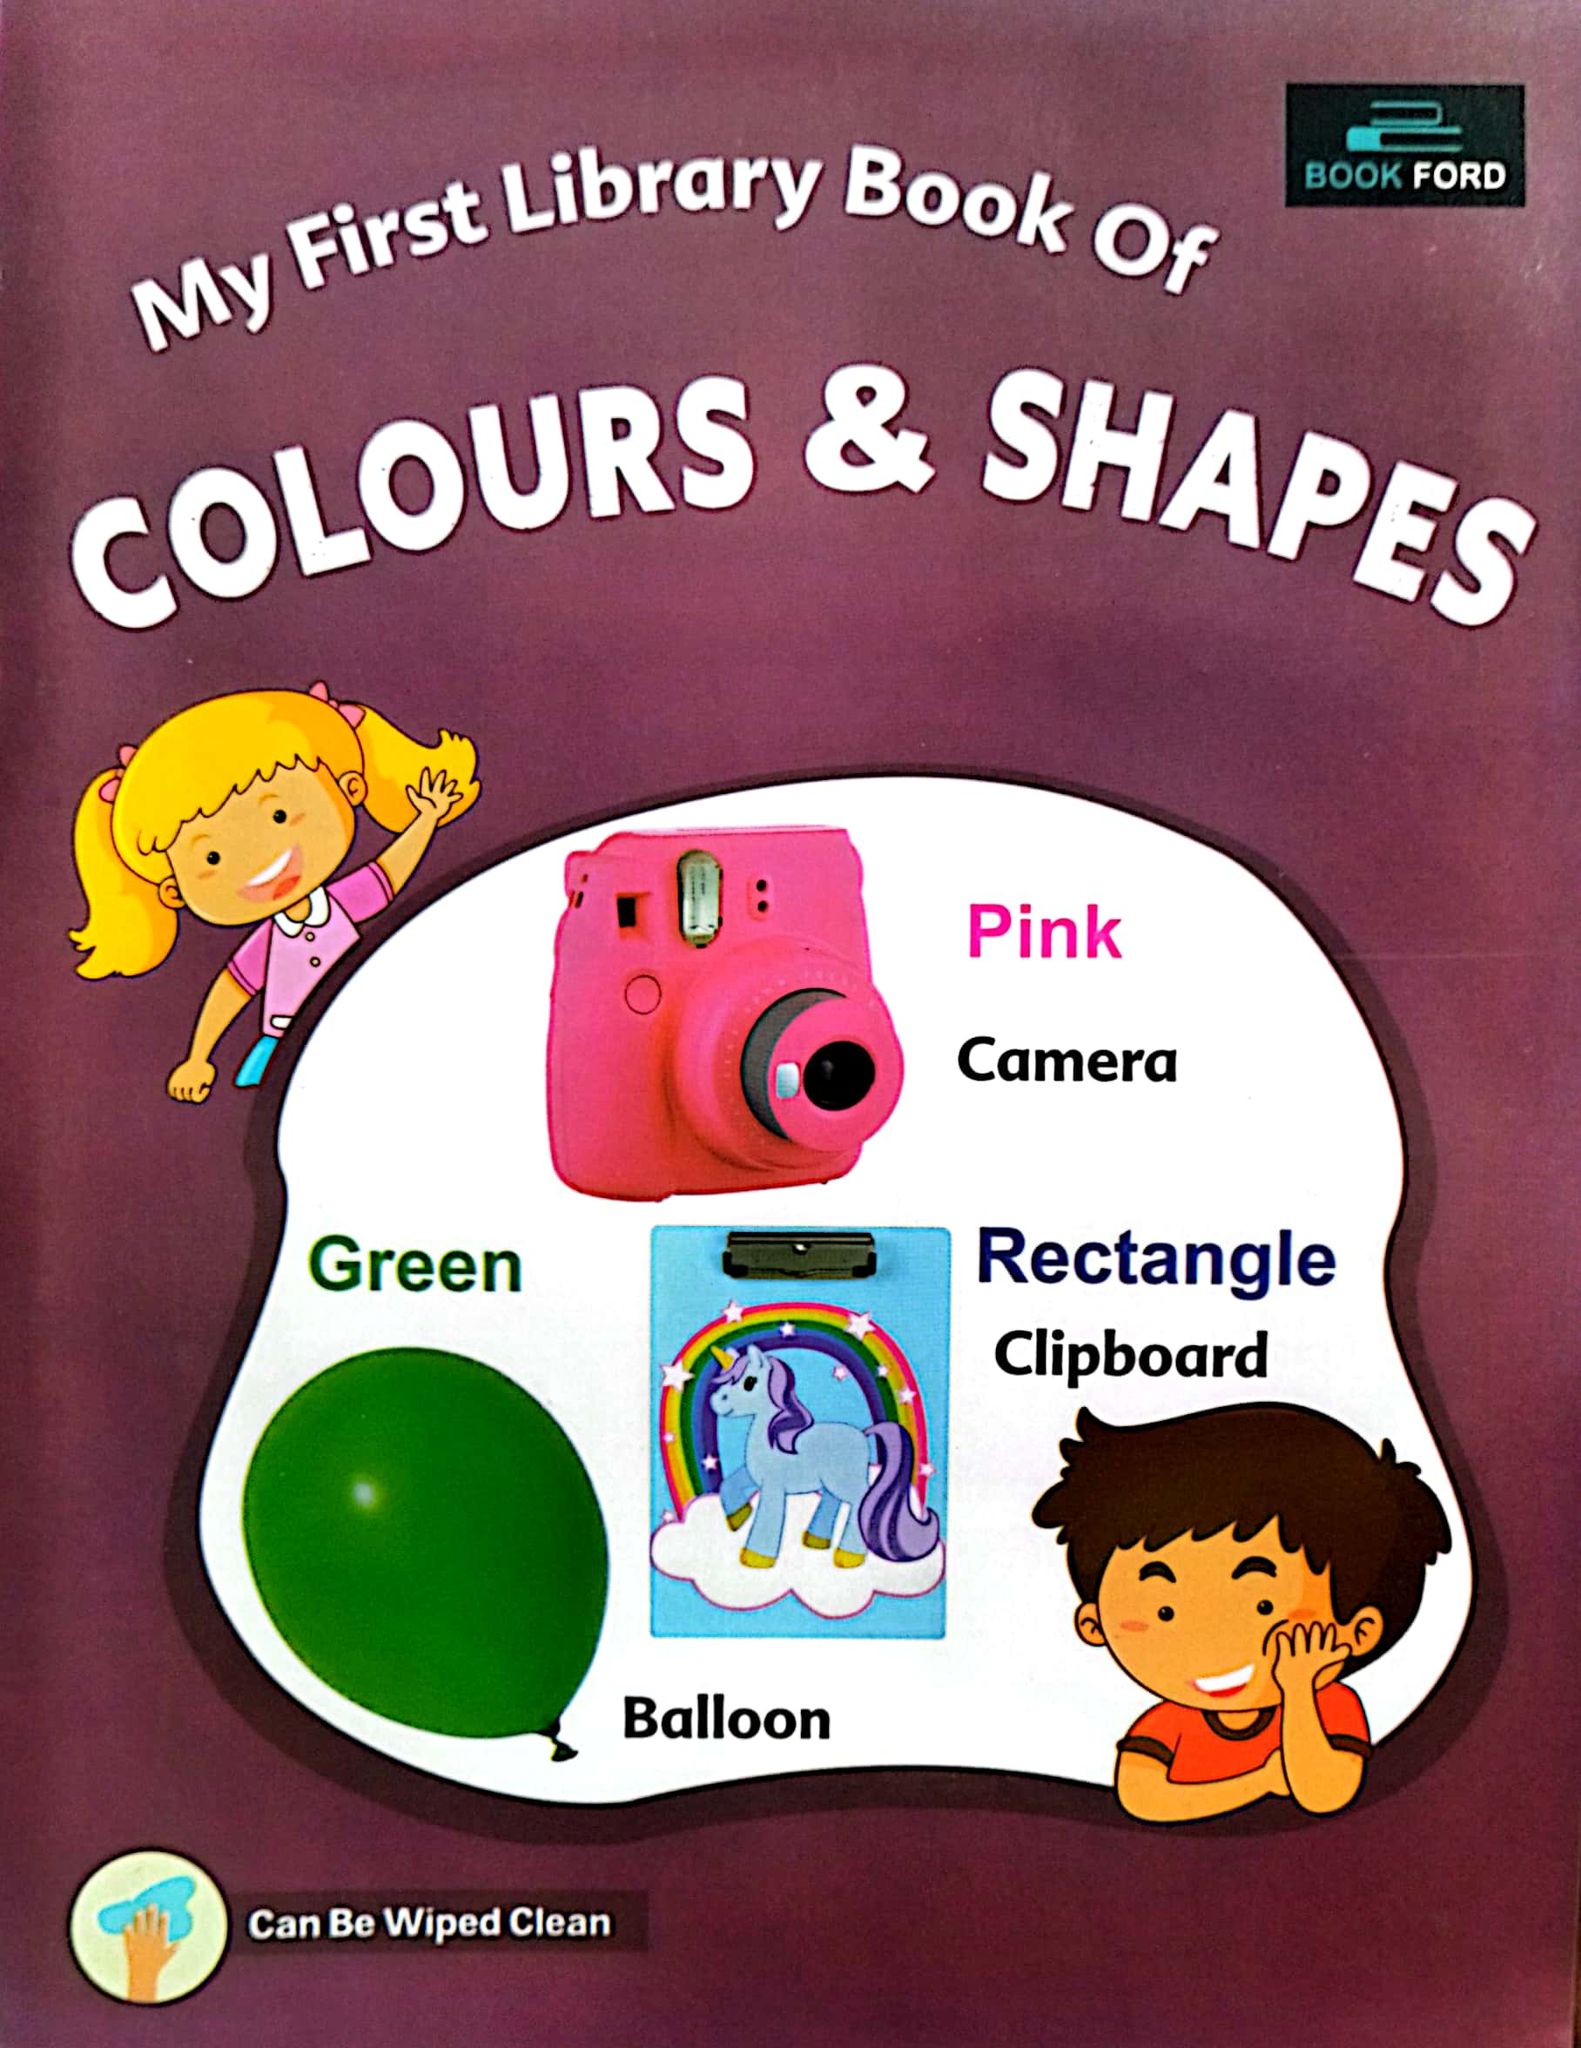 My First Library Book Of Colours & Shapes (পেপারব্যাক)